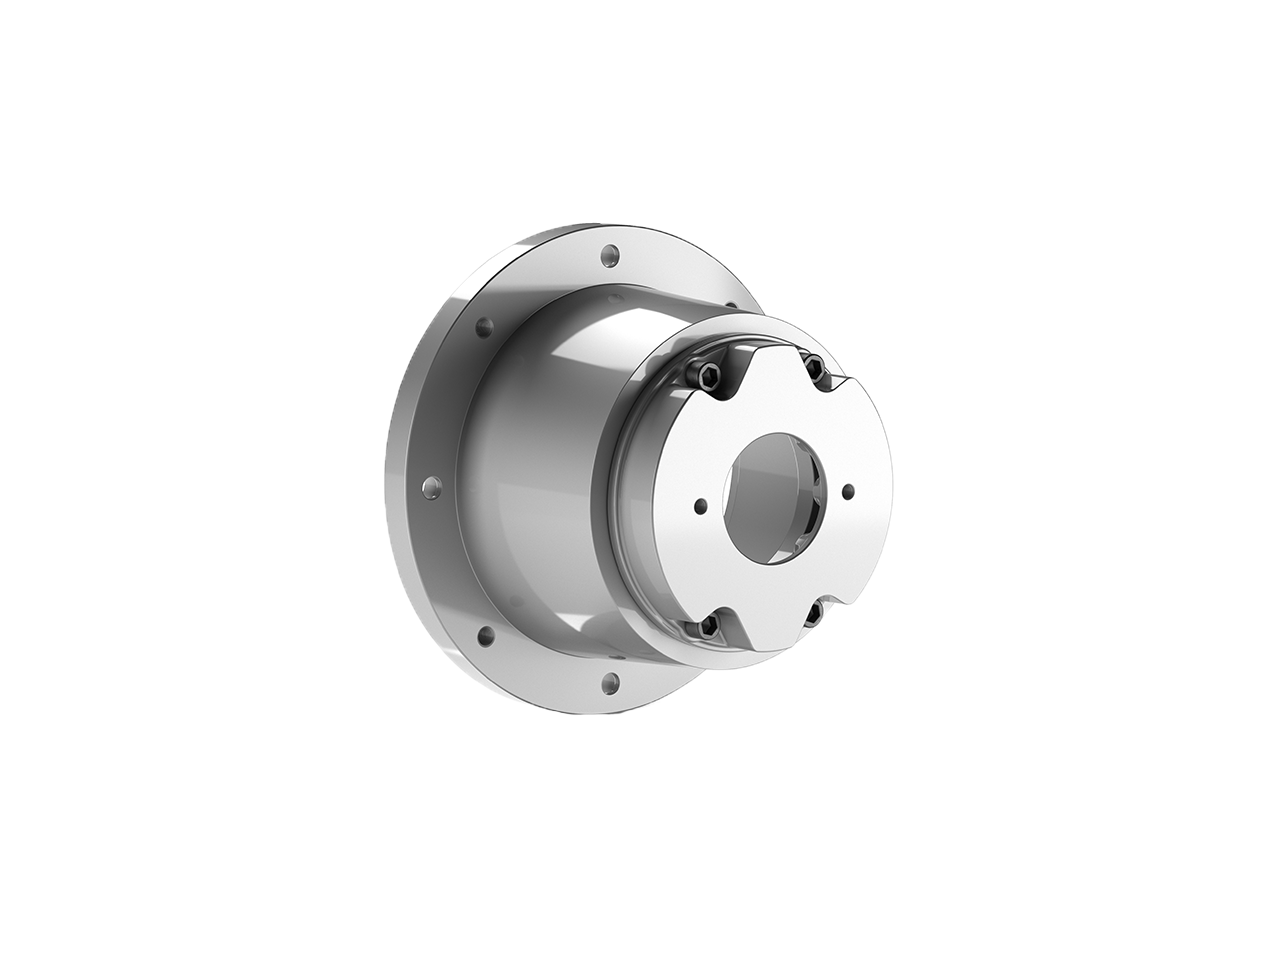 MP Filtri Bell-housings and couplings